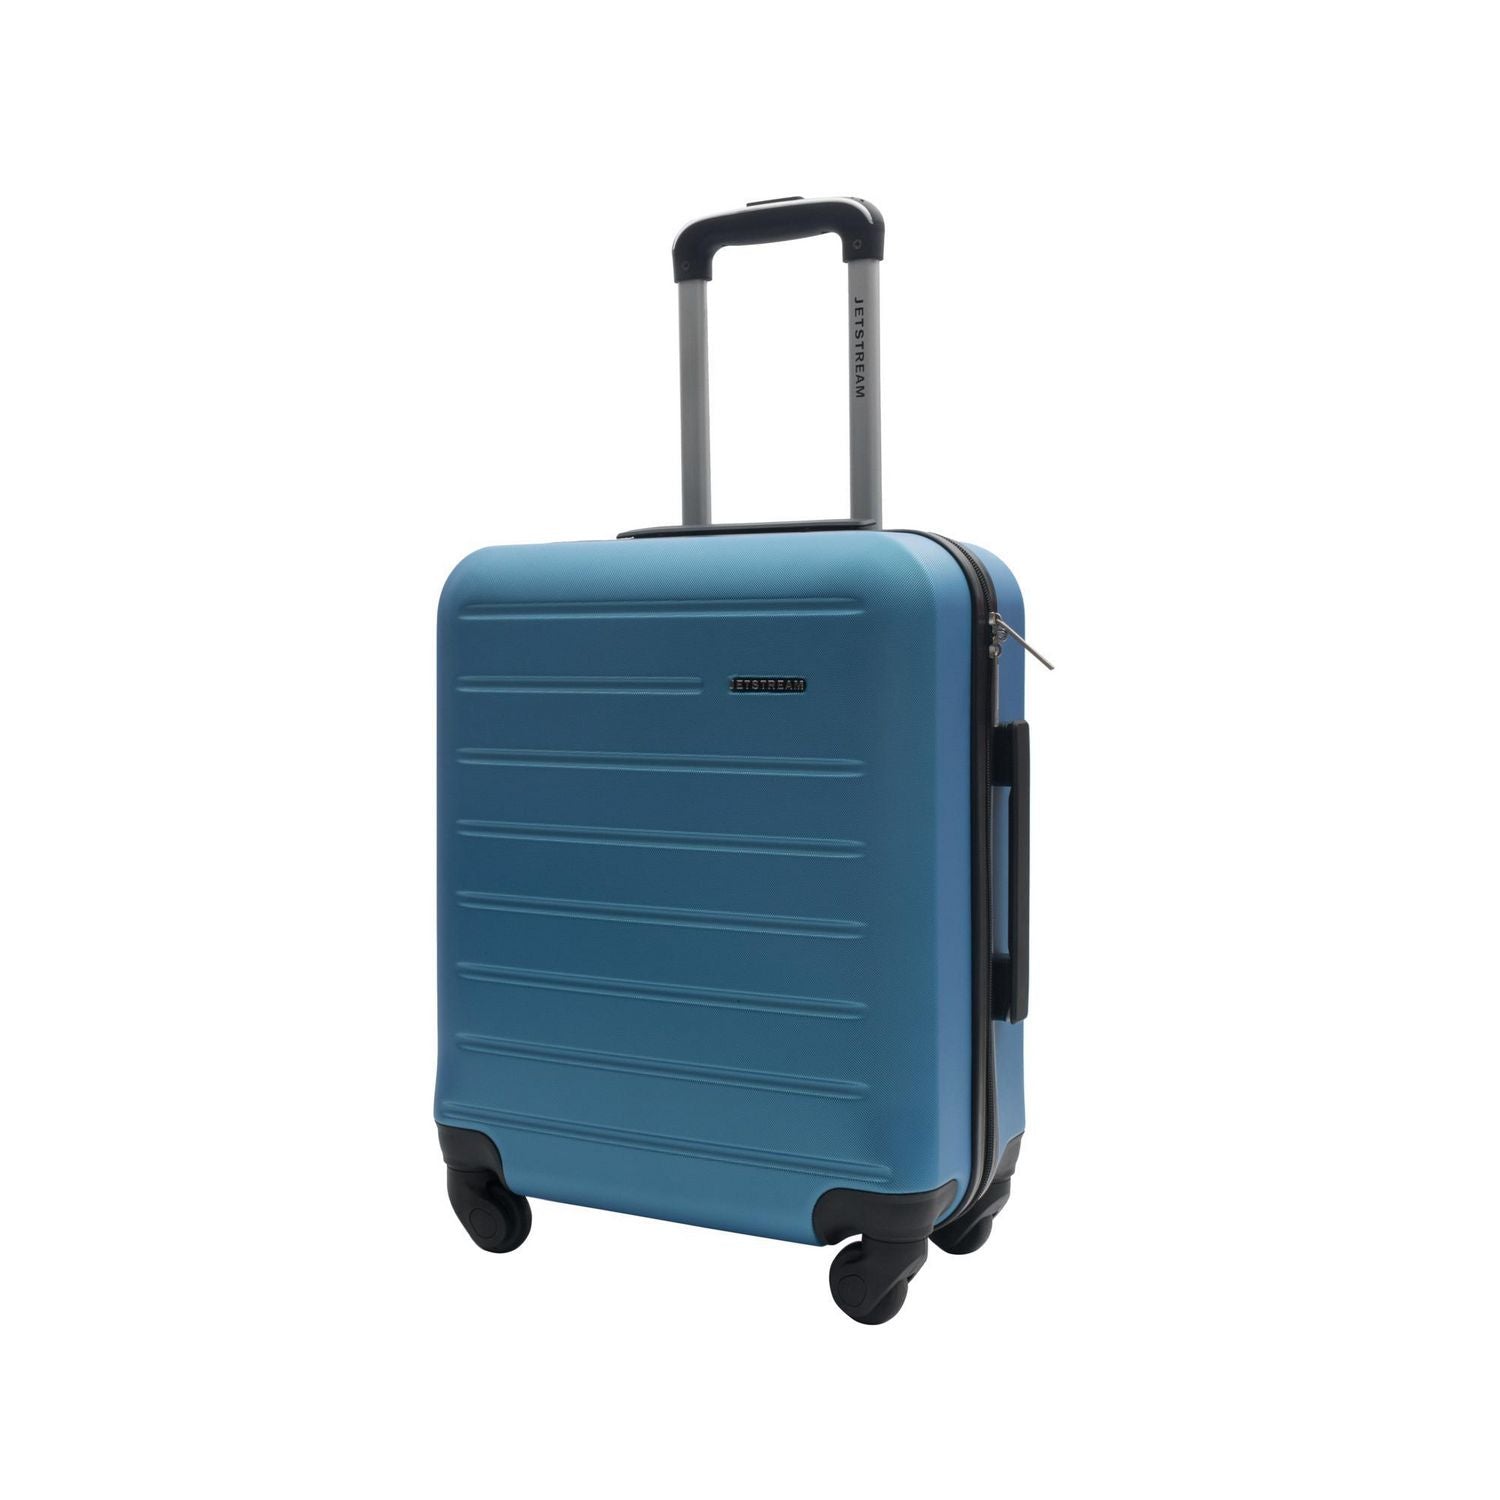 Jetstream Carry-on with 3-Piece Packing Cube Set (Blue)